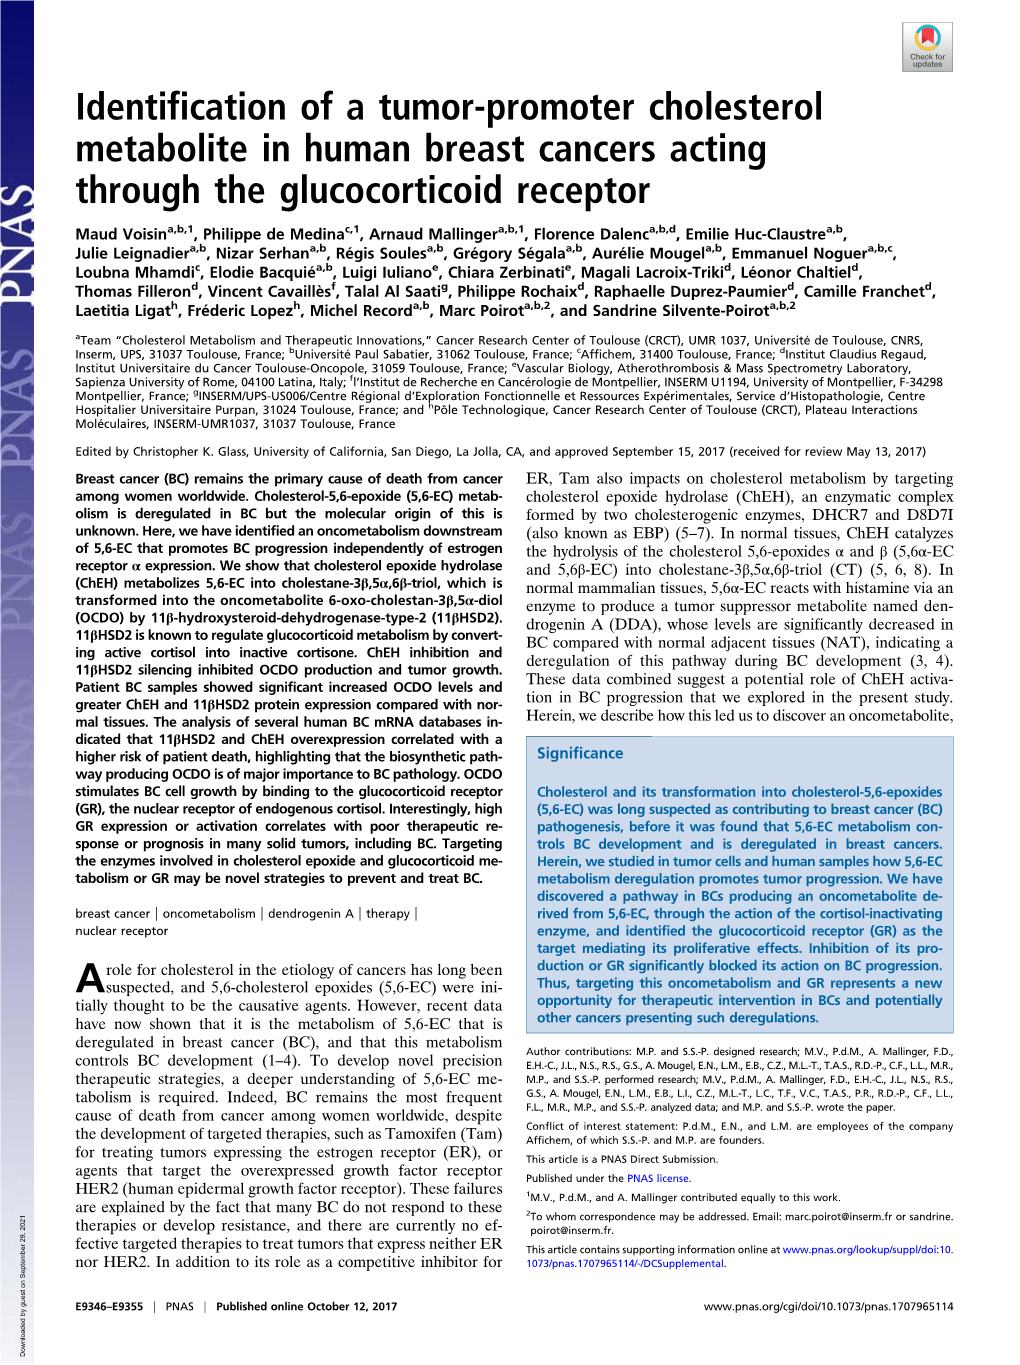 Identification of a Tumor-Promoter Cholesterol Metabolite in Human Breast Cancers Acting Through the Glucocorticoid Receptor